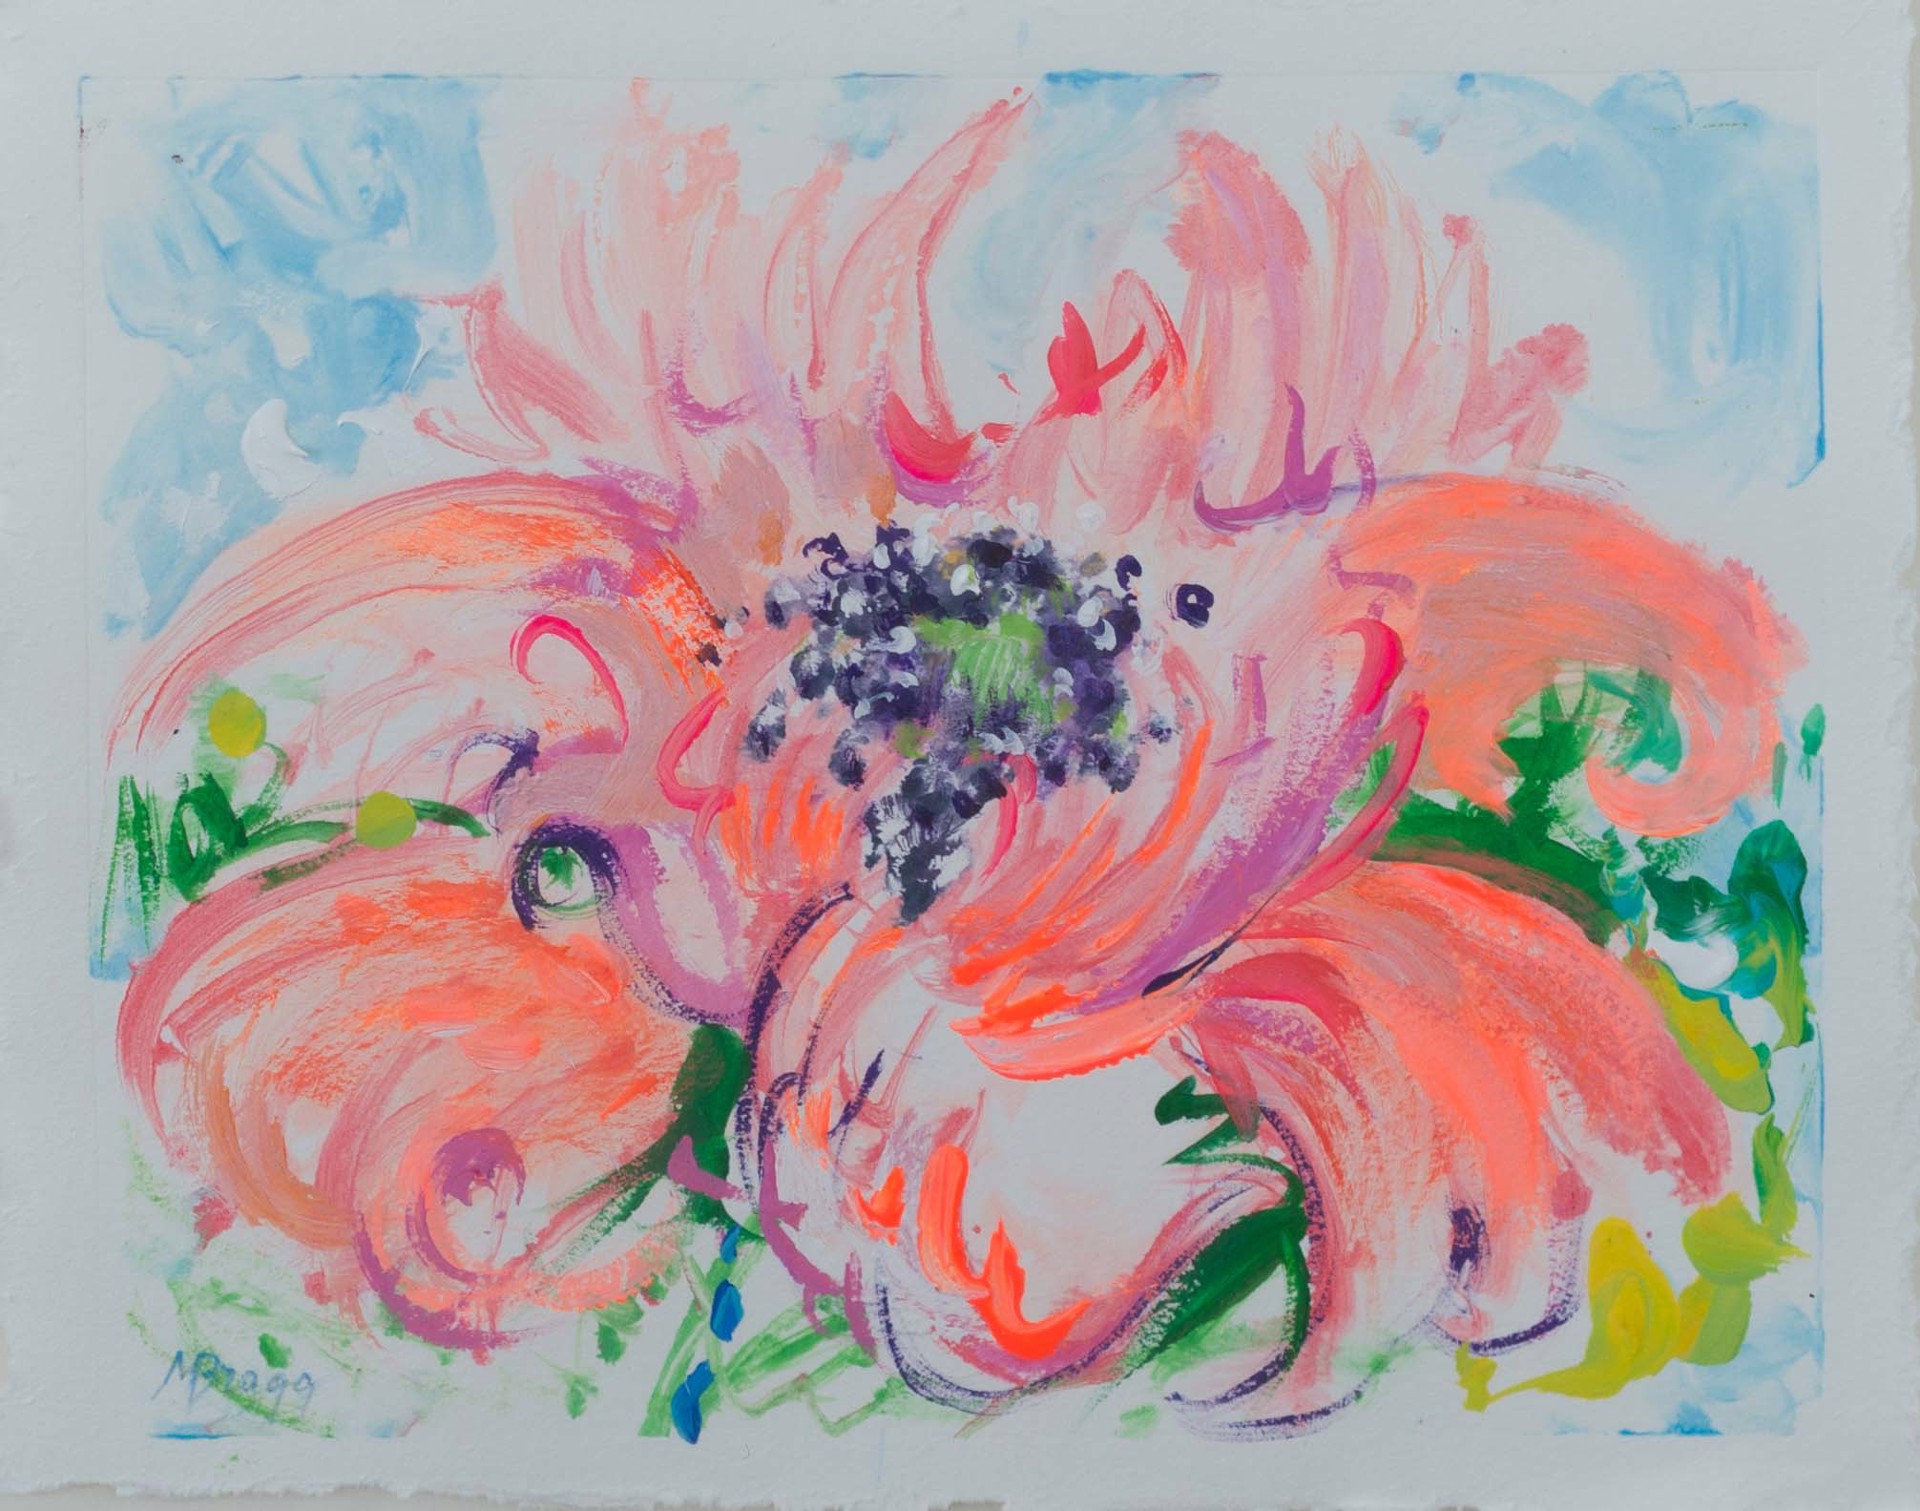 Apricot Opening (Peony) by Margaret Bragg